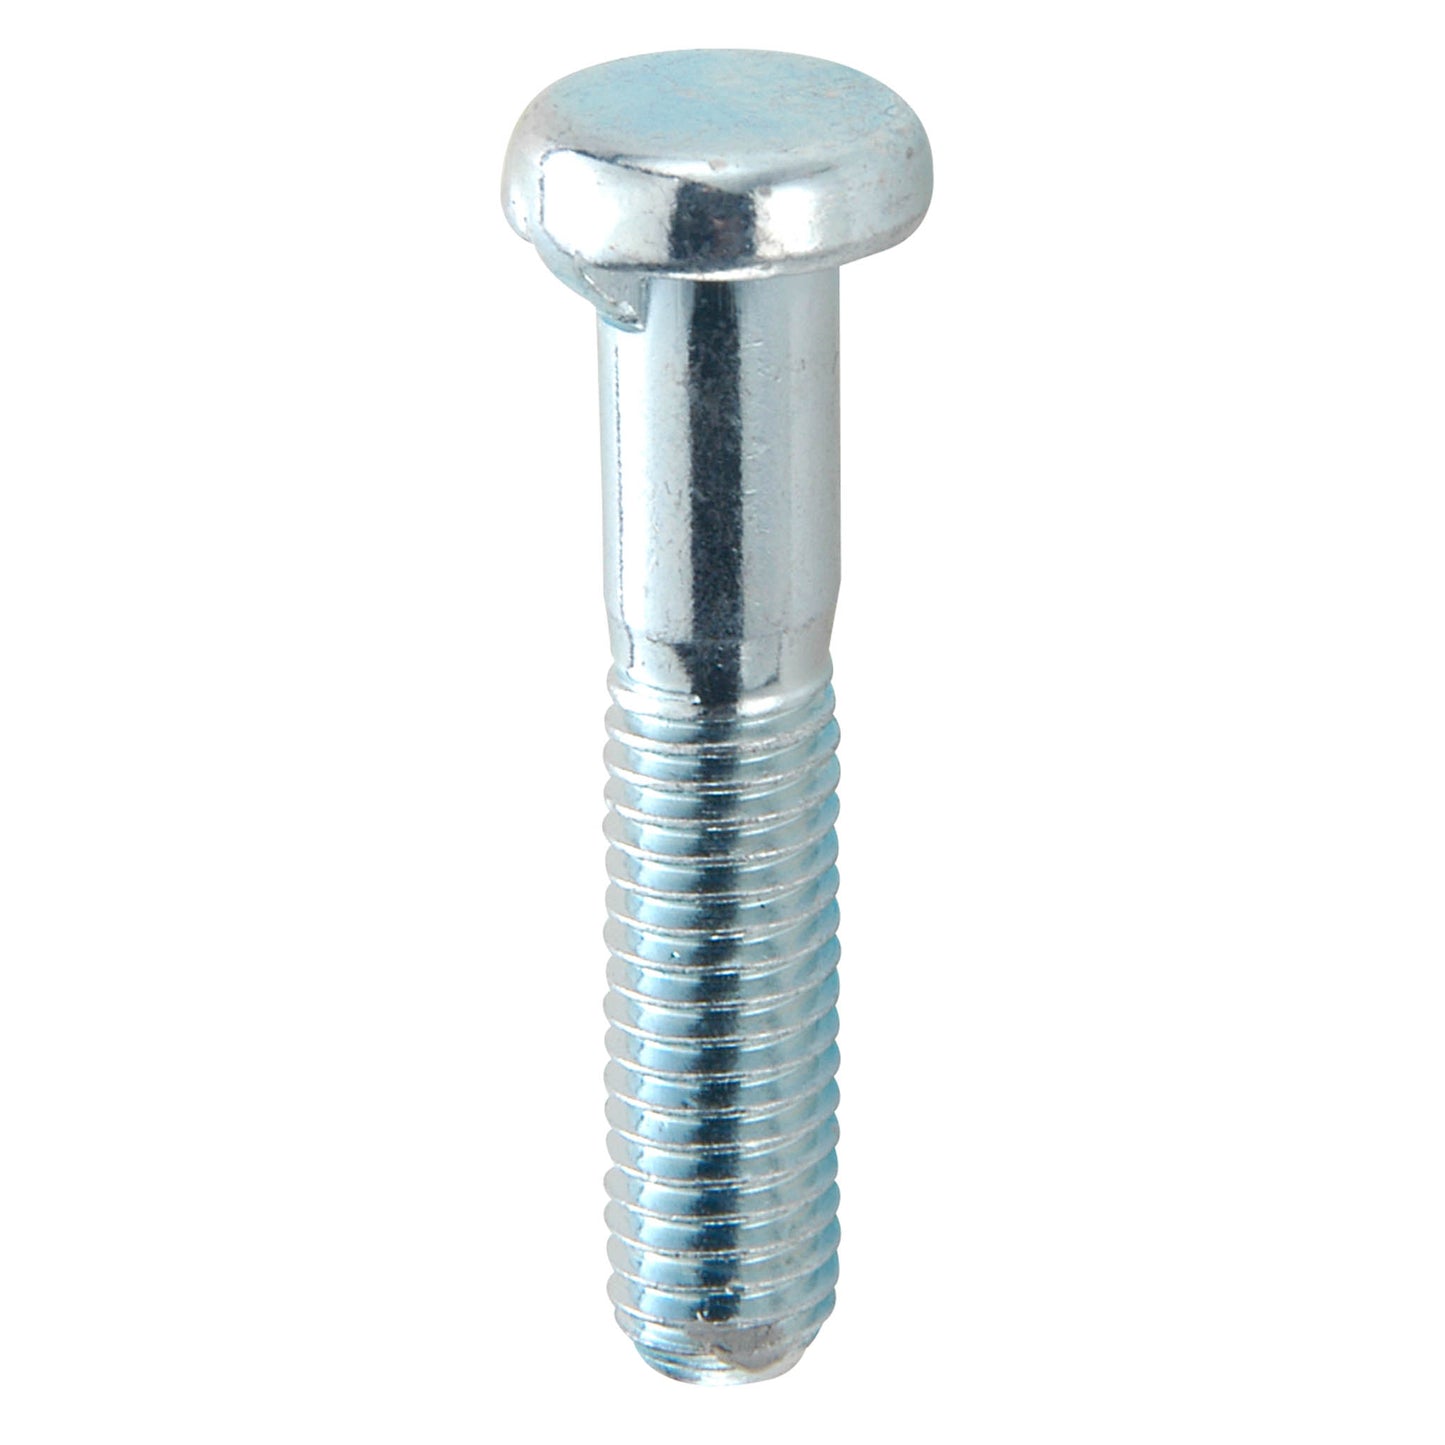 Handlebar and seat post clamping bolt M 8 x 32, galvanized steel